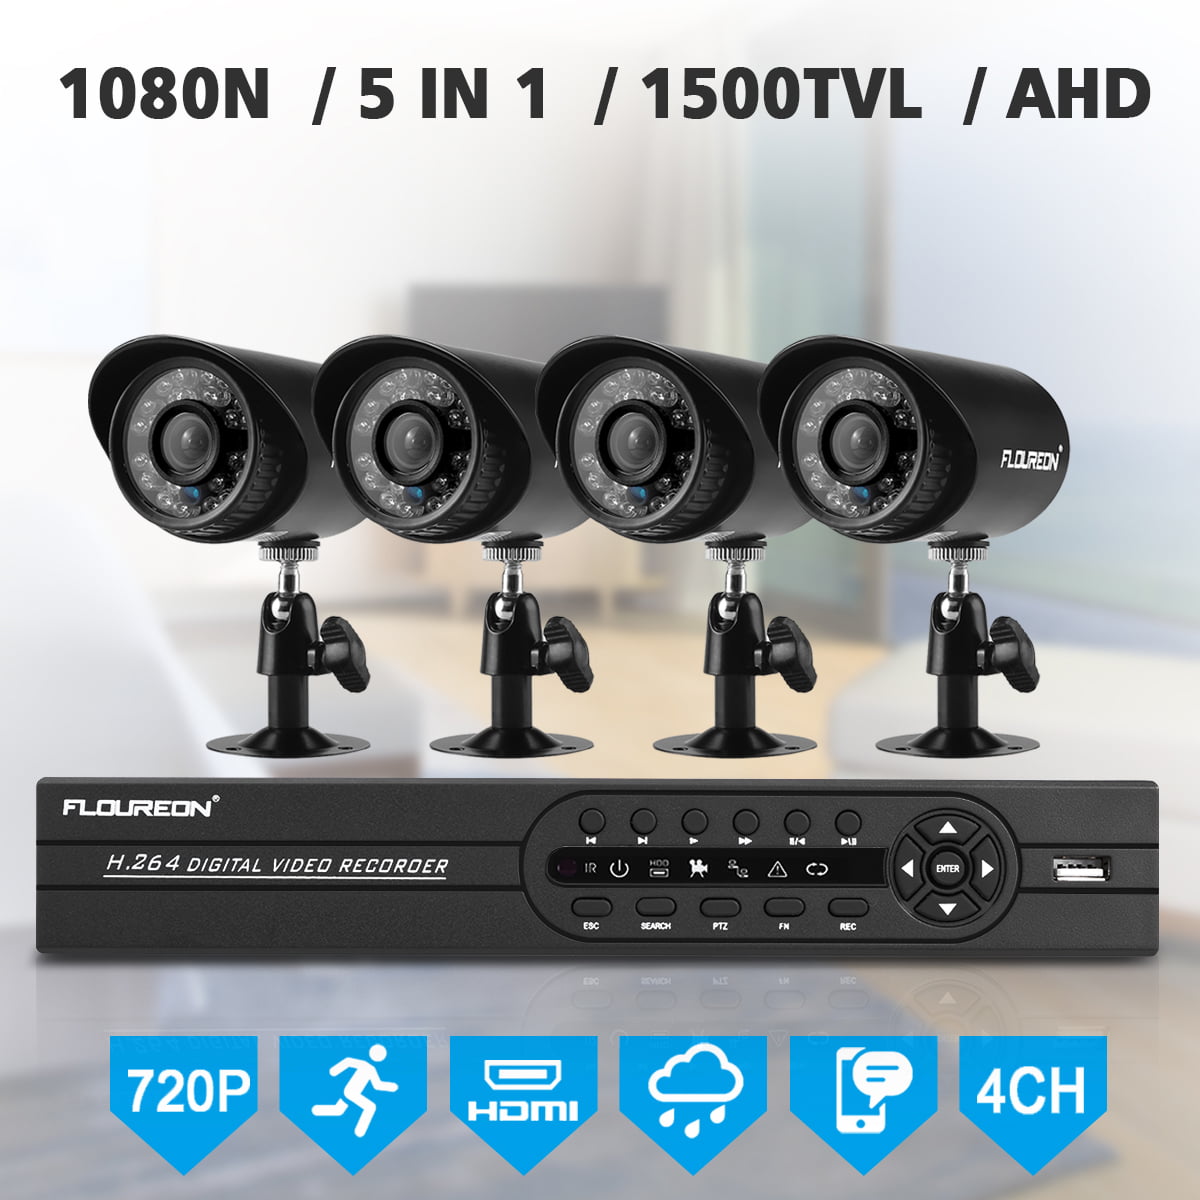 4CH 1080N 5IN1 DVR Indoor/Outdoor IR-CUT Camera Security System Motion Detection 